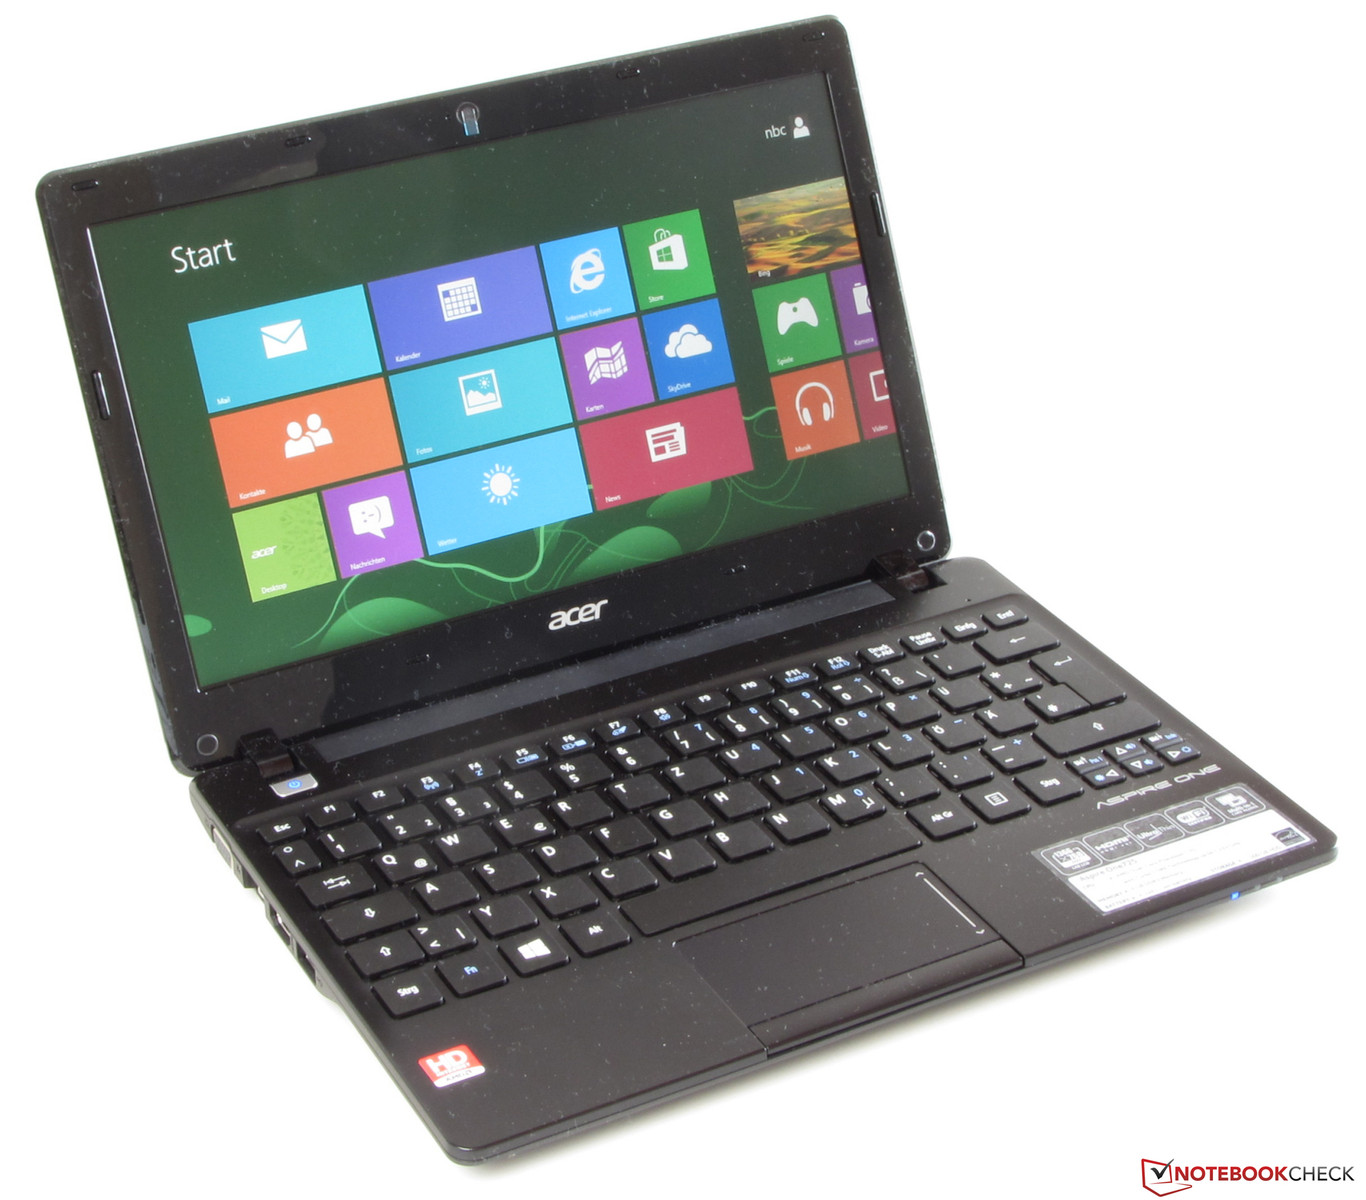 Acer Aspire One 725 Drivers Windows Xp - Netbook Acer Aspire One 725 Download Drivers For Windows Xp Windows 7 Windows 8 32 64 Bit Driversfree Org : Check spelling or type a new query.